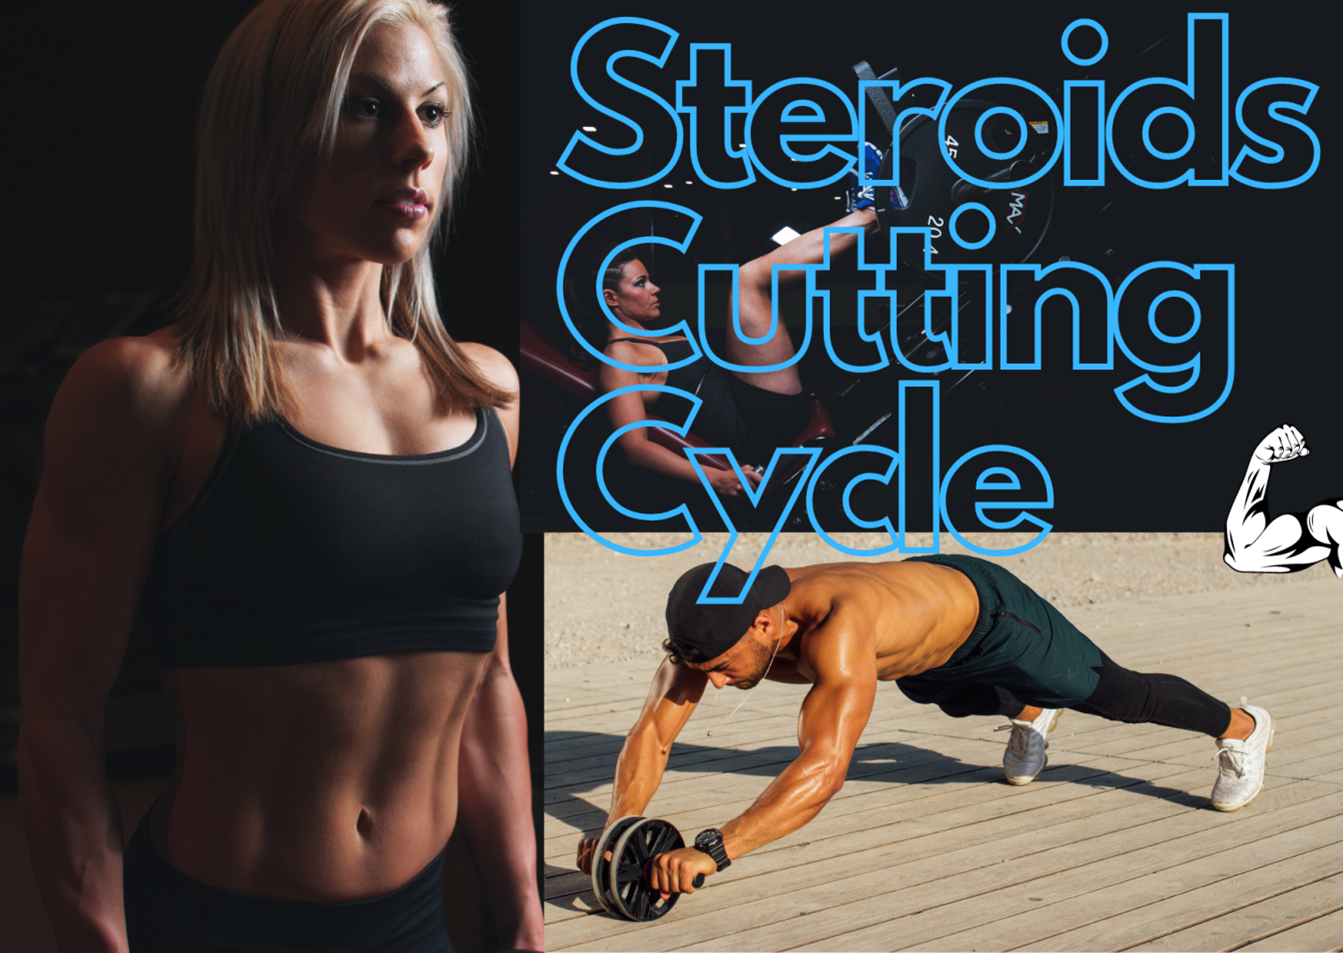 Steroids cutting cycle